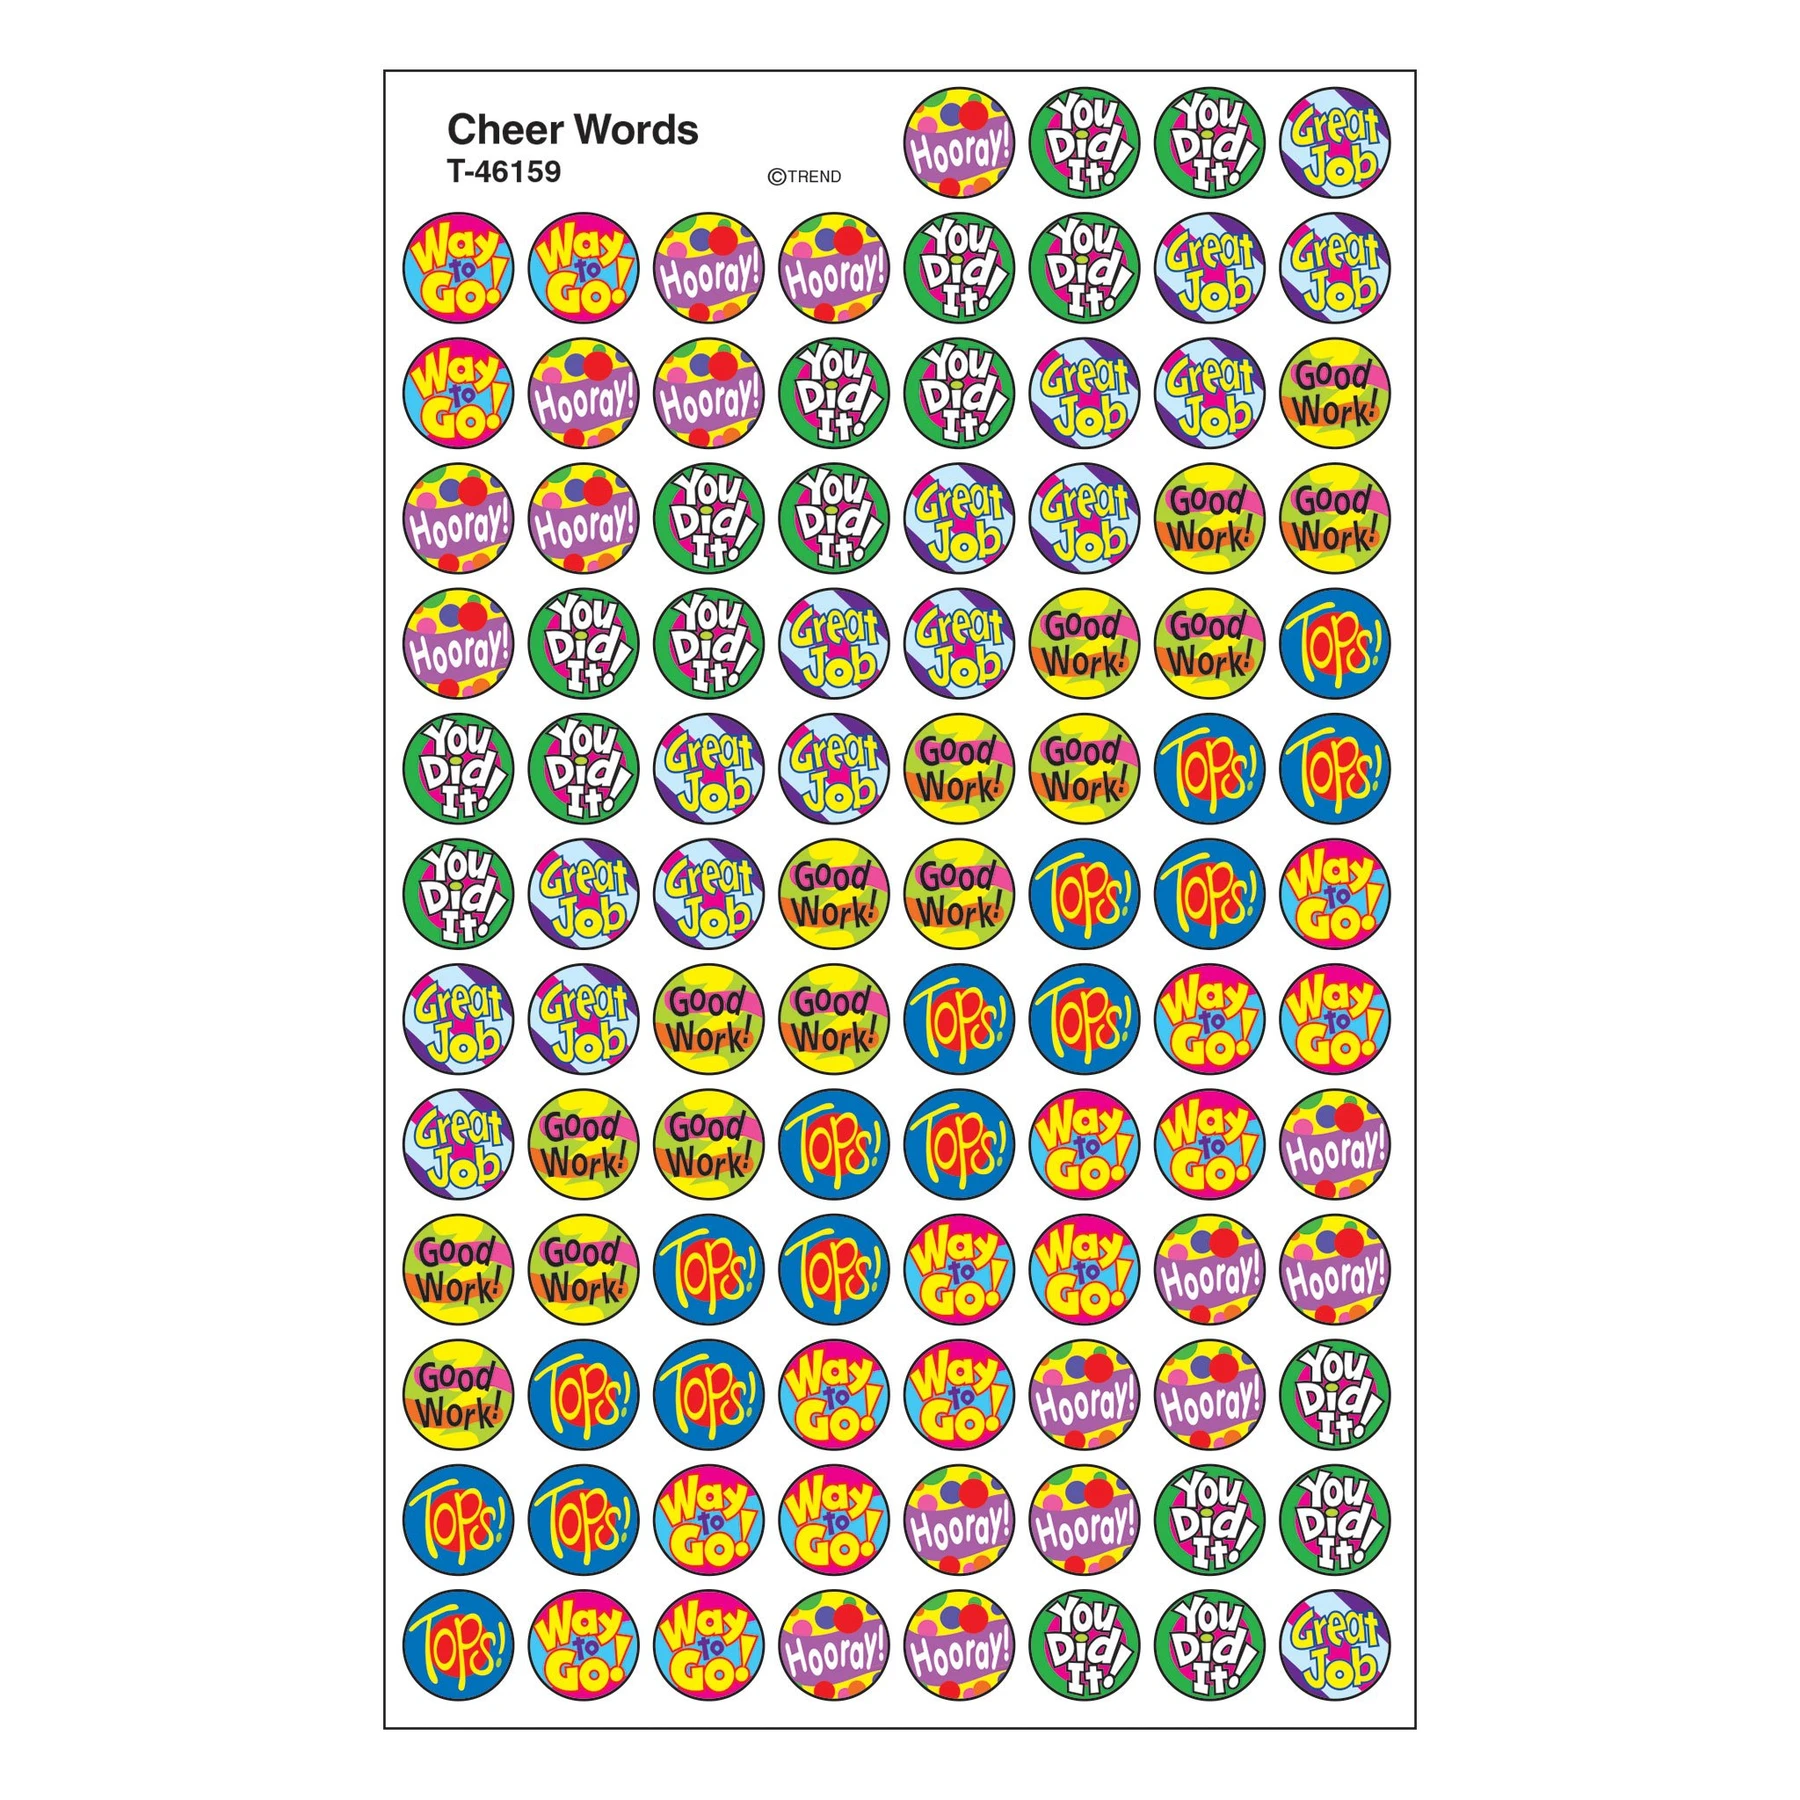 Trend SuperSpots Colorful Sparkle Smiles Stickers, Variety Pack - 1,300 per pack